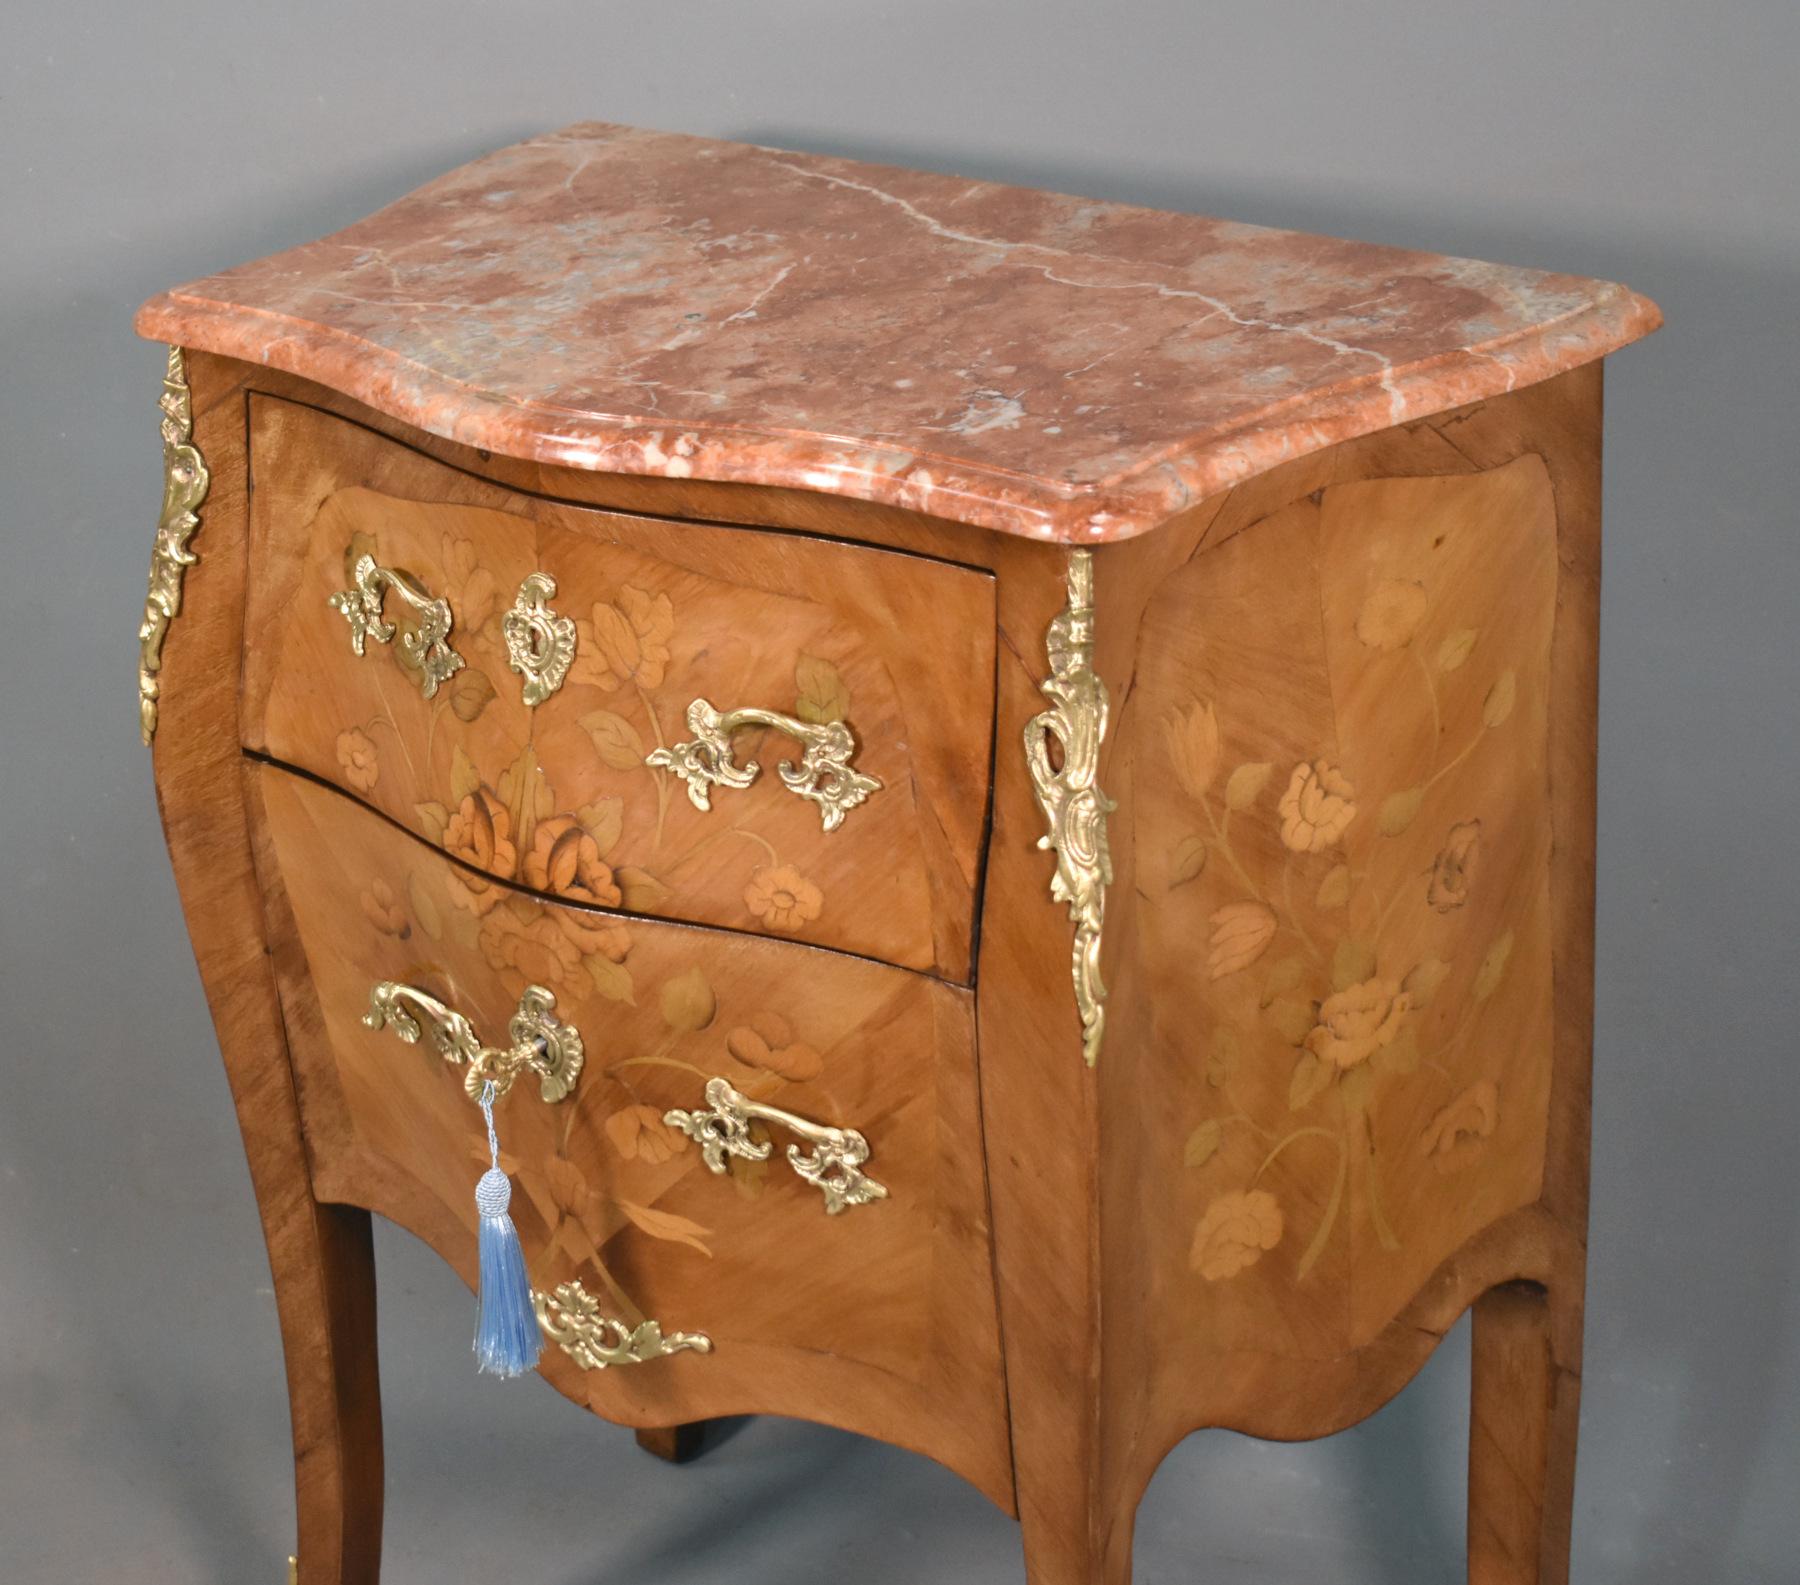 Ormolu Antique French Louis XV Revival Marquetry Bombe Commode 19C For Sale